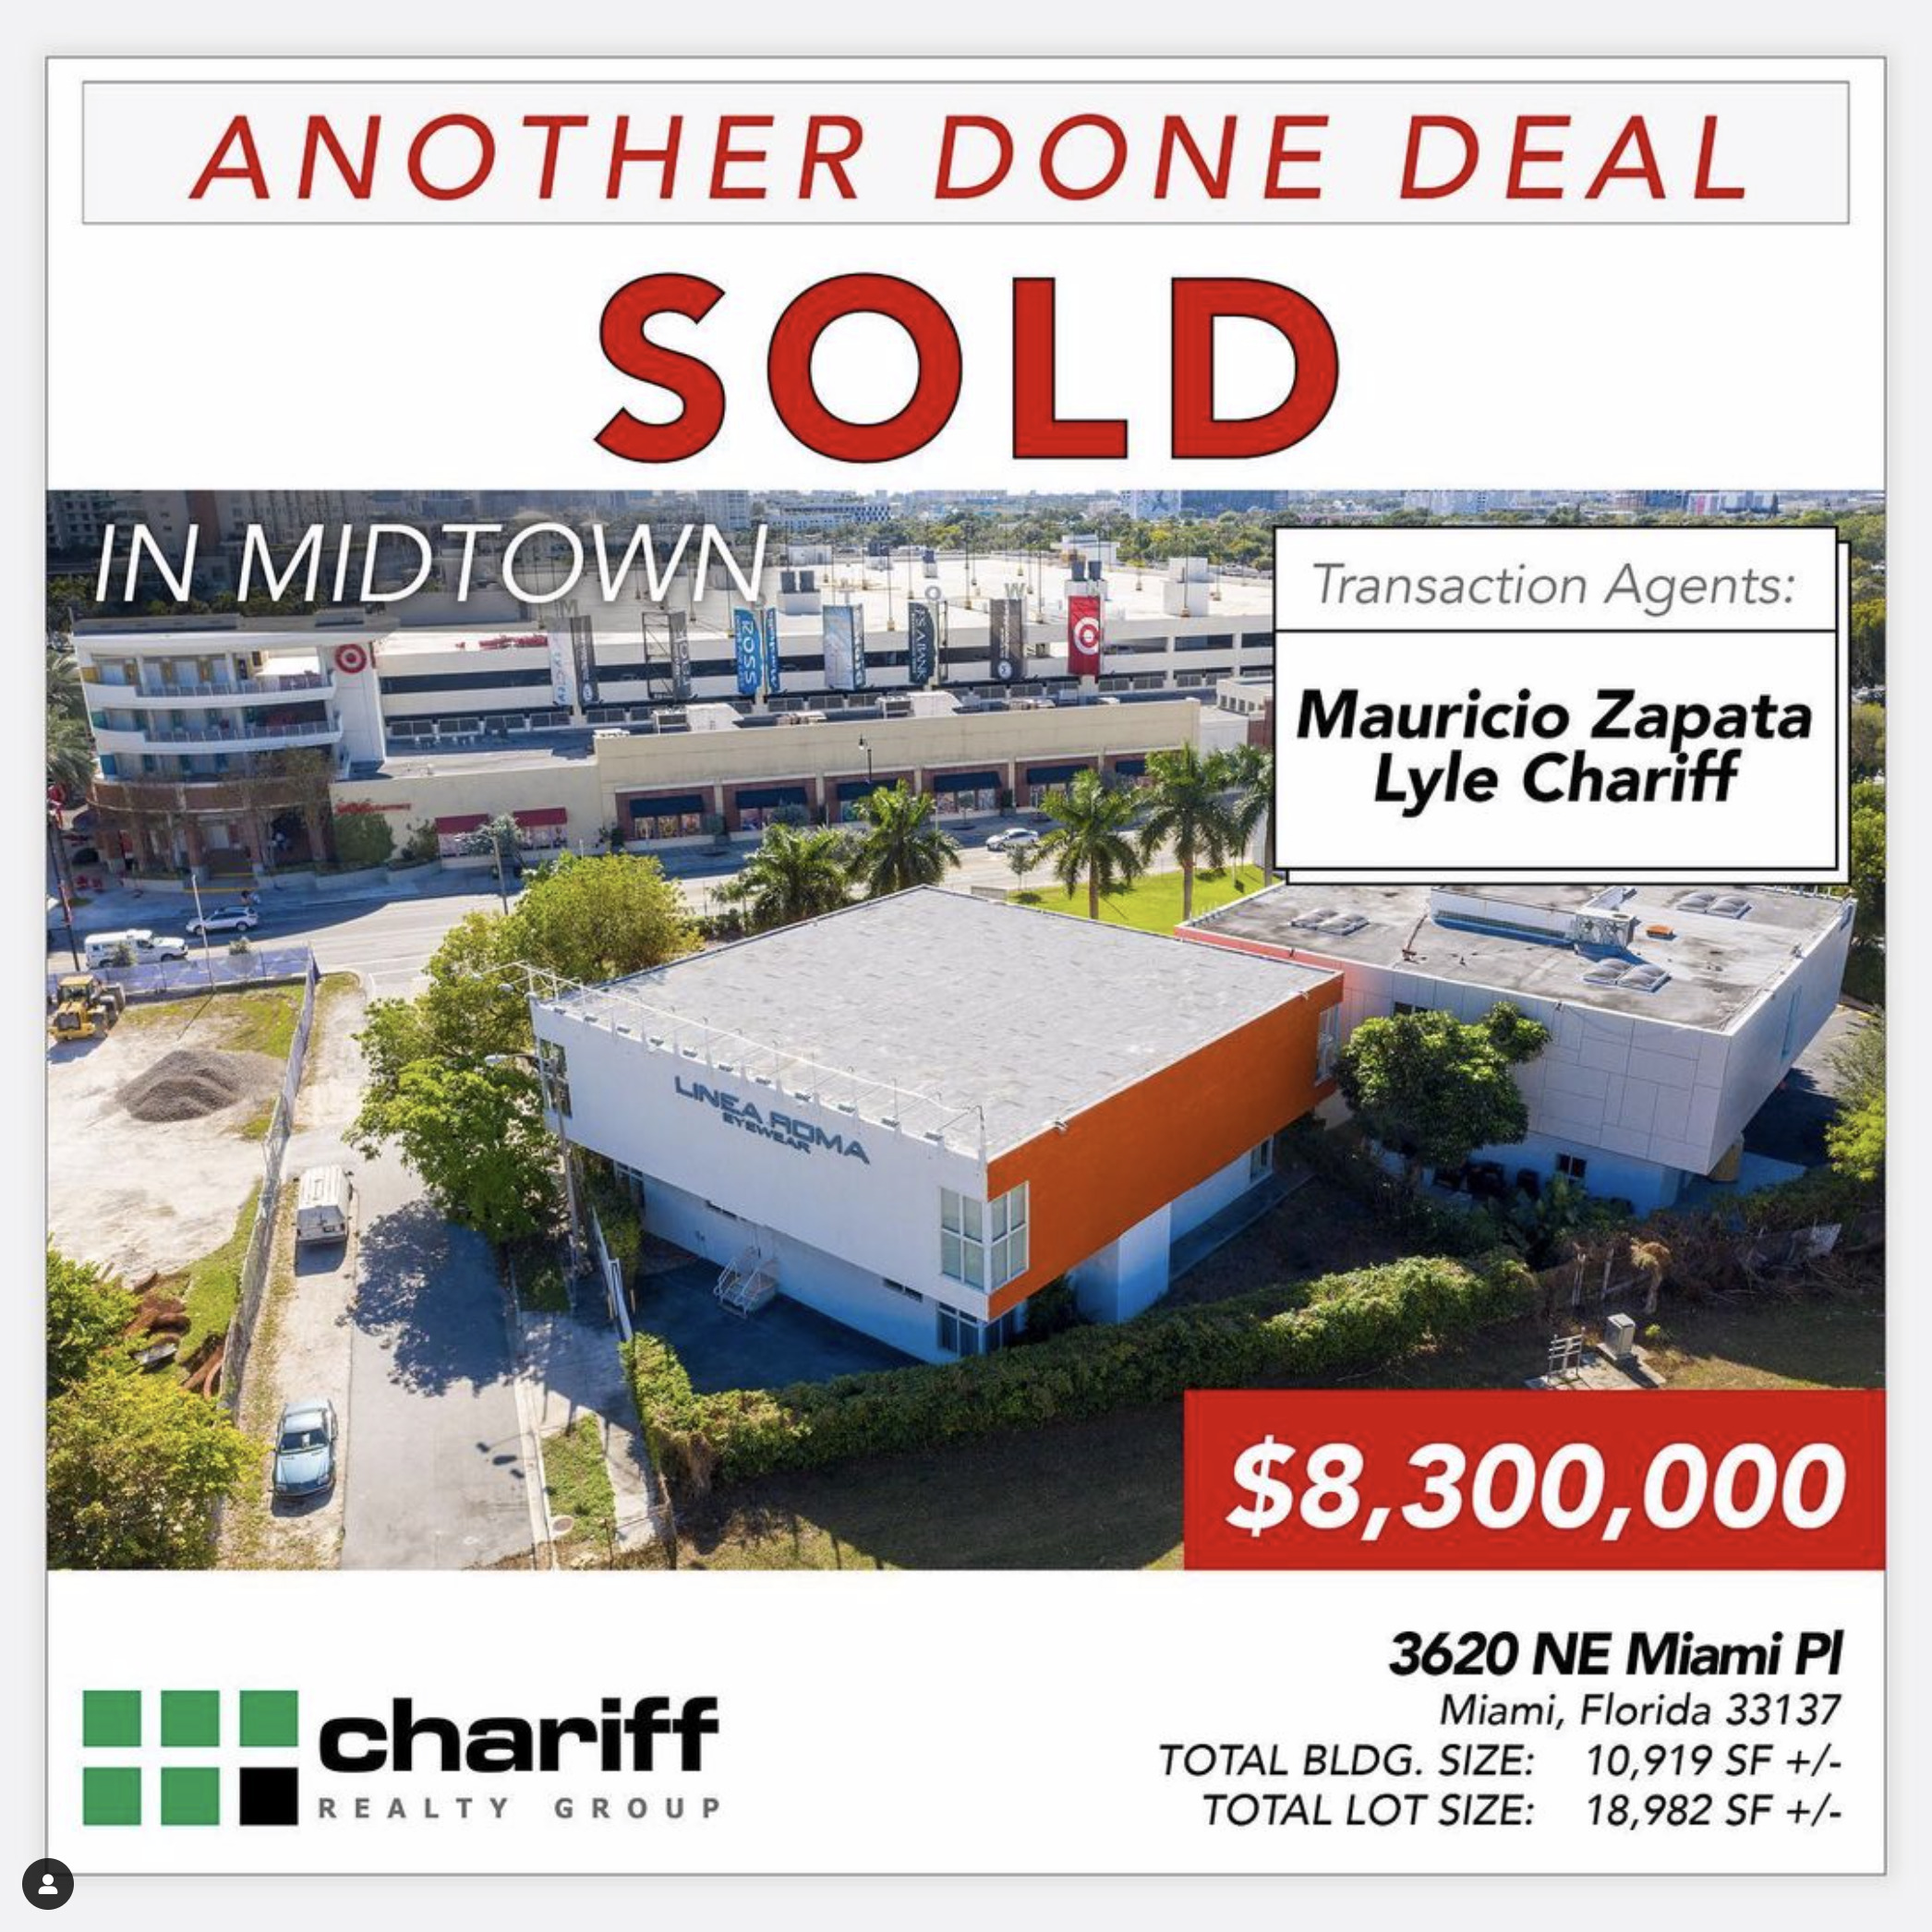 3650 N Miami Ave - Another Done Deal - Sold -Miami Design District Miami-Florida-33137-Chariff Realty Group